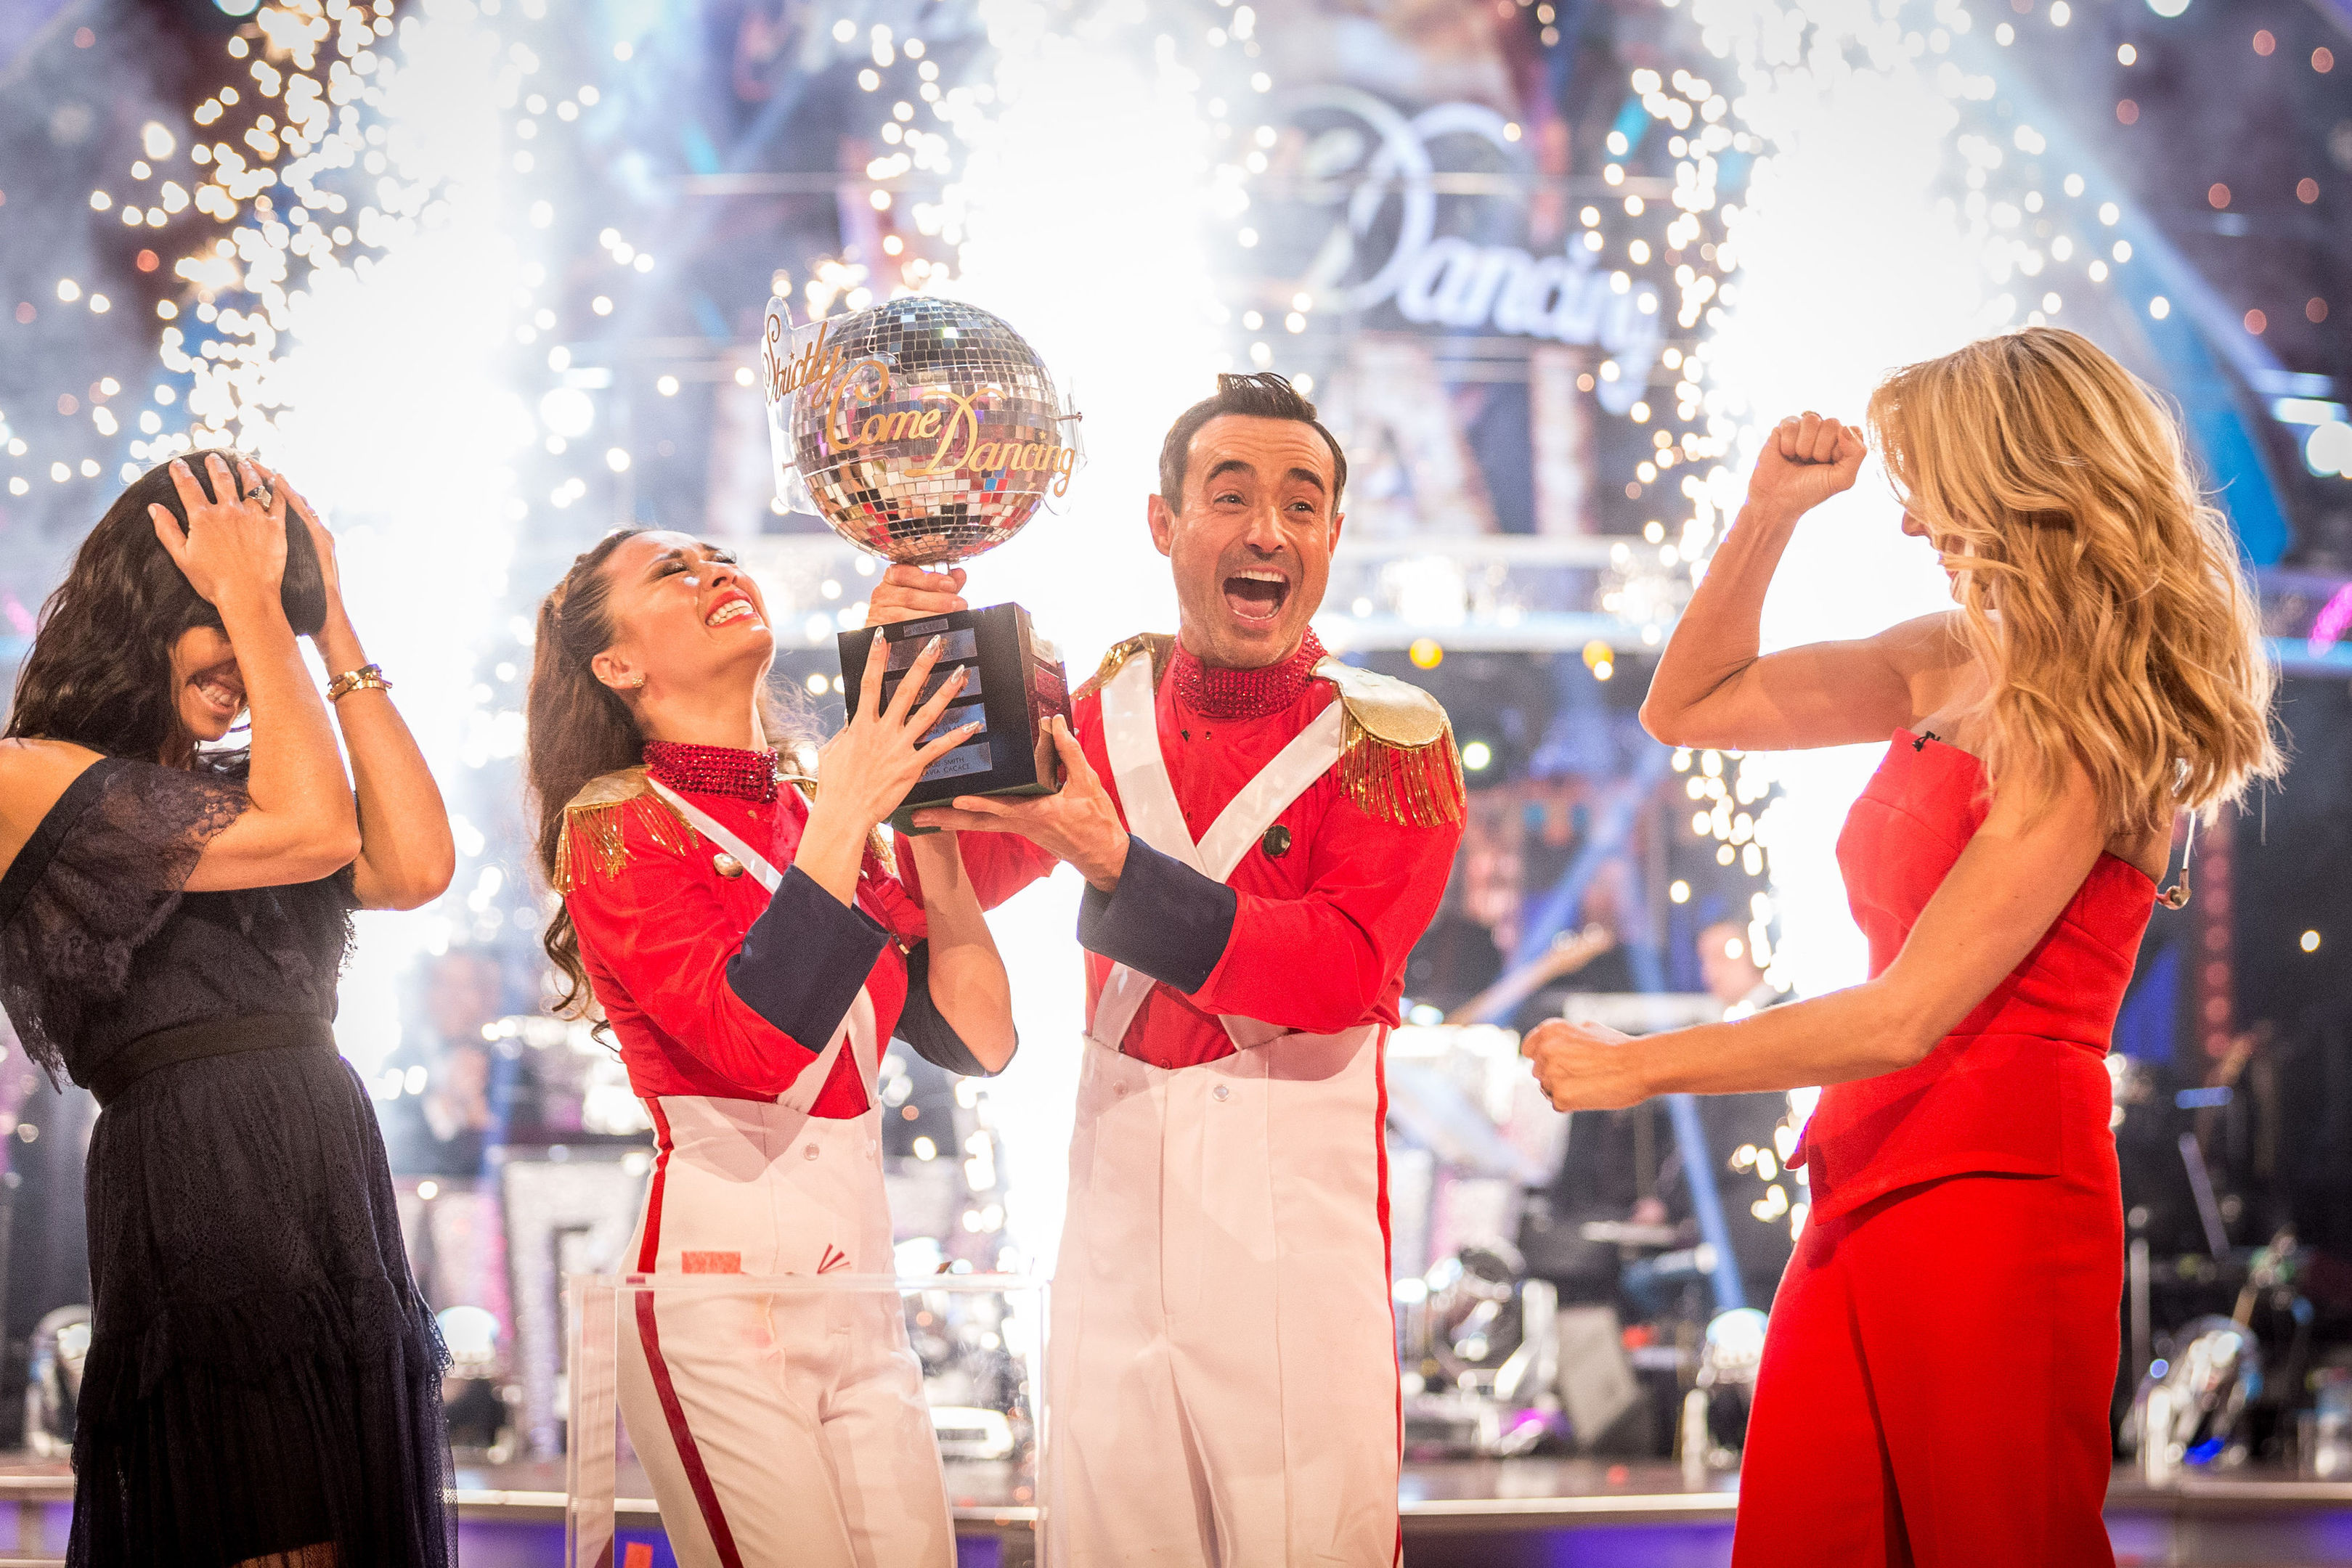 Claudia Winkleman (left) and Tess Daly (right) present Katya Jones and Joe McFadden with the glitterball trophy (Guy Levy/BBC/PA Wire)